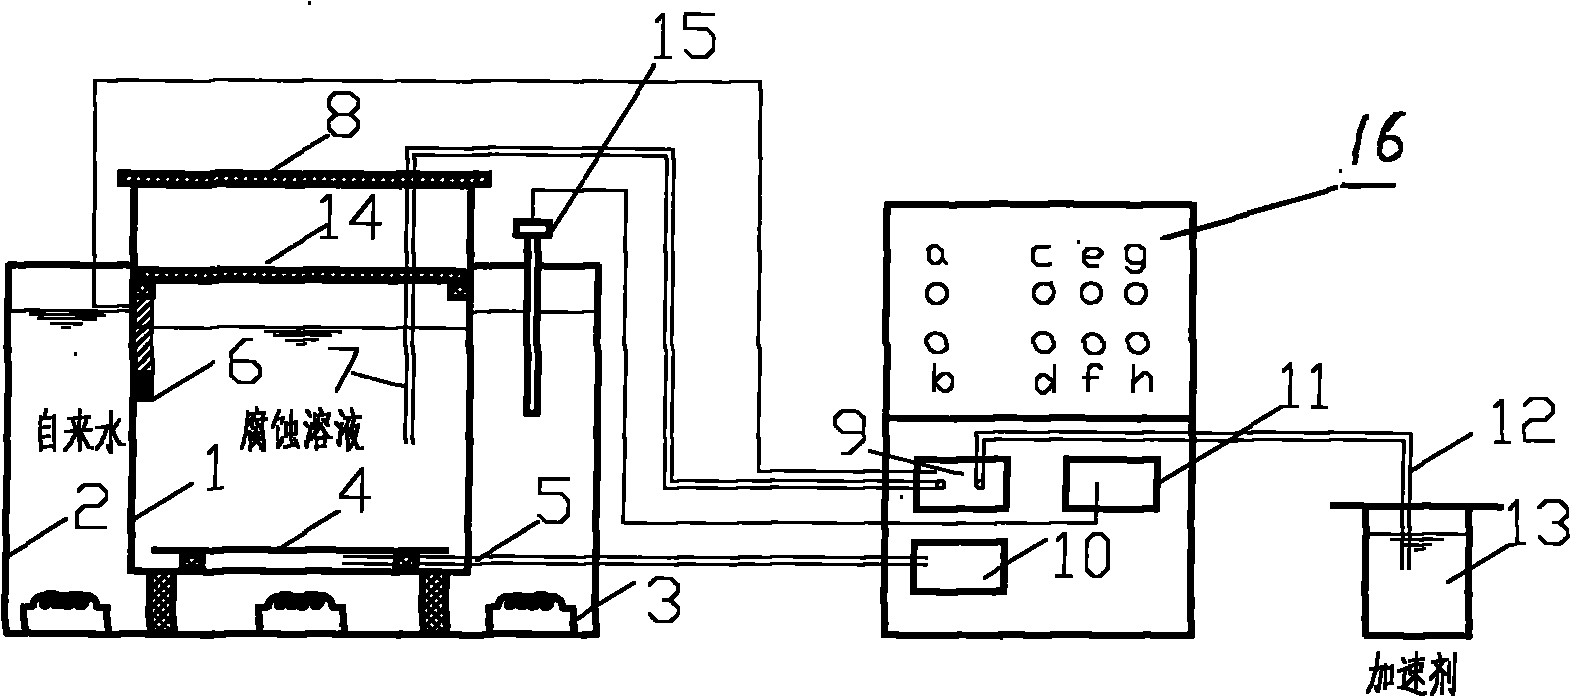 Analog accelerated corrosion test device